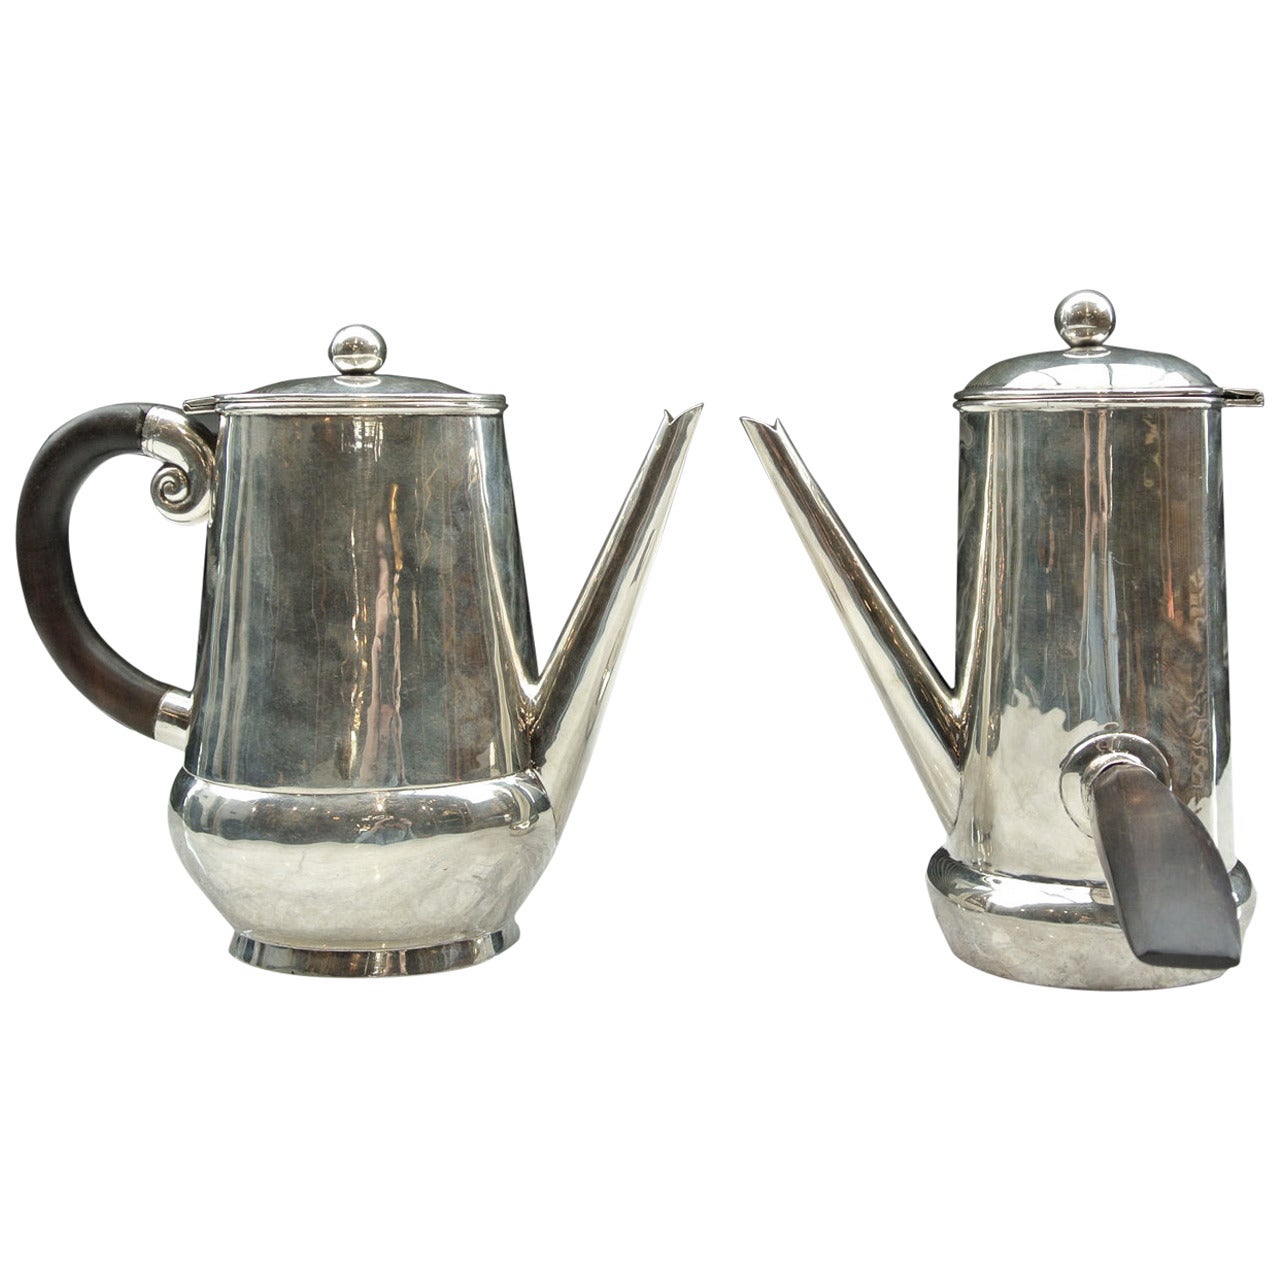 William Spratling Tea and Coffee Silver Handled Kettle Set For Sale